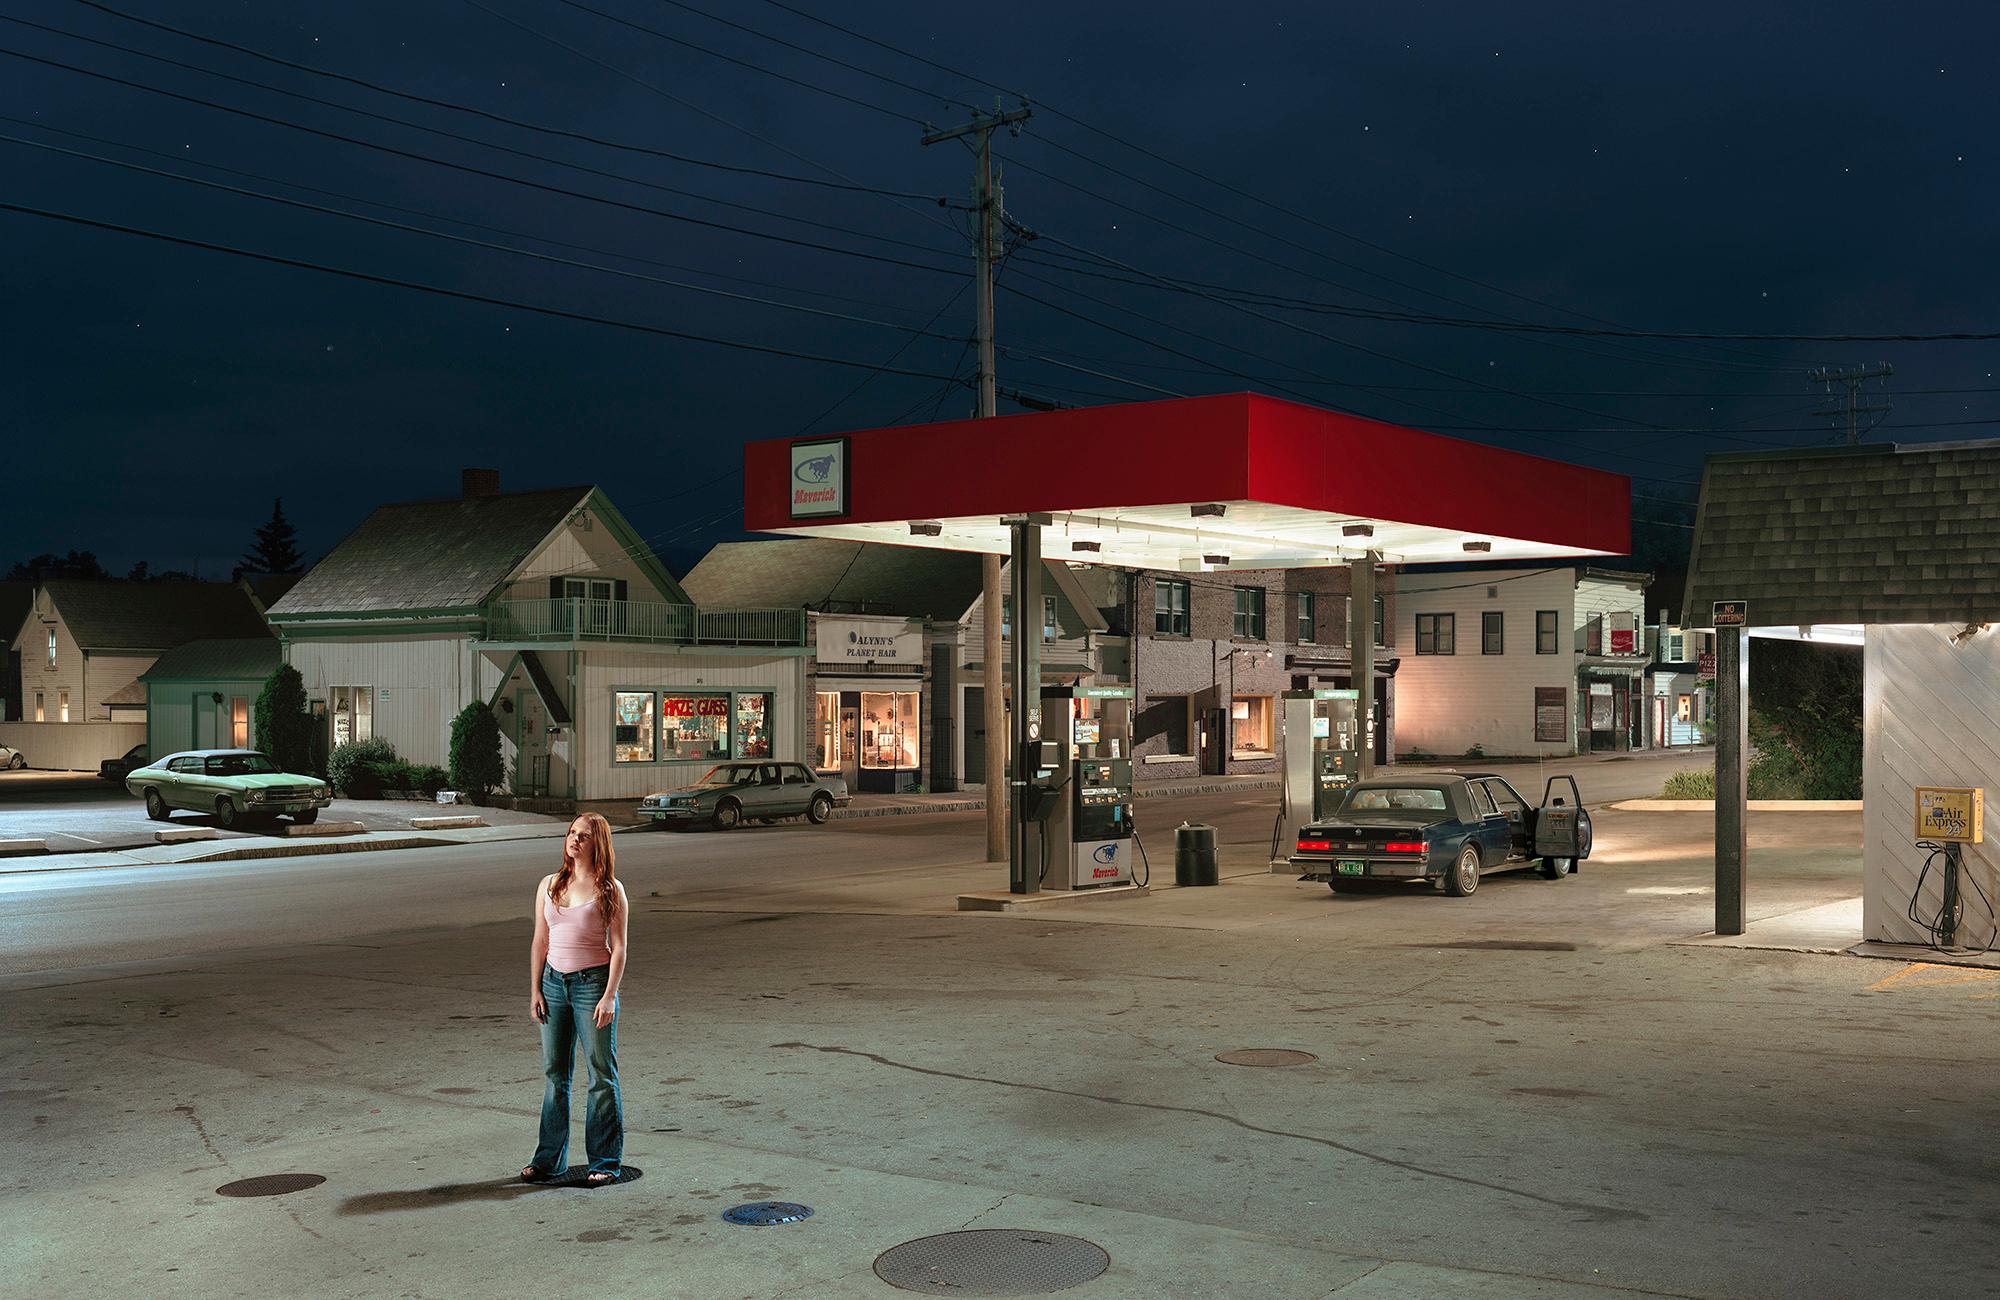 Gregory Crewdson Color Photograph - Untitled, Unreleased #4, 2003